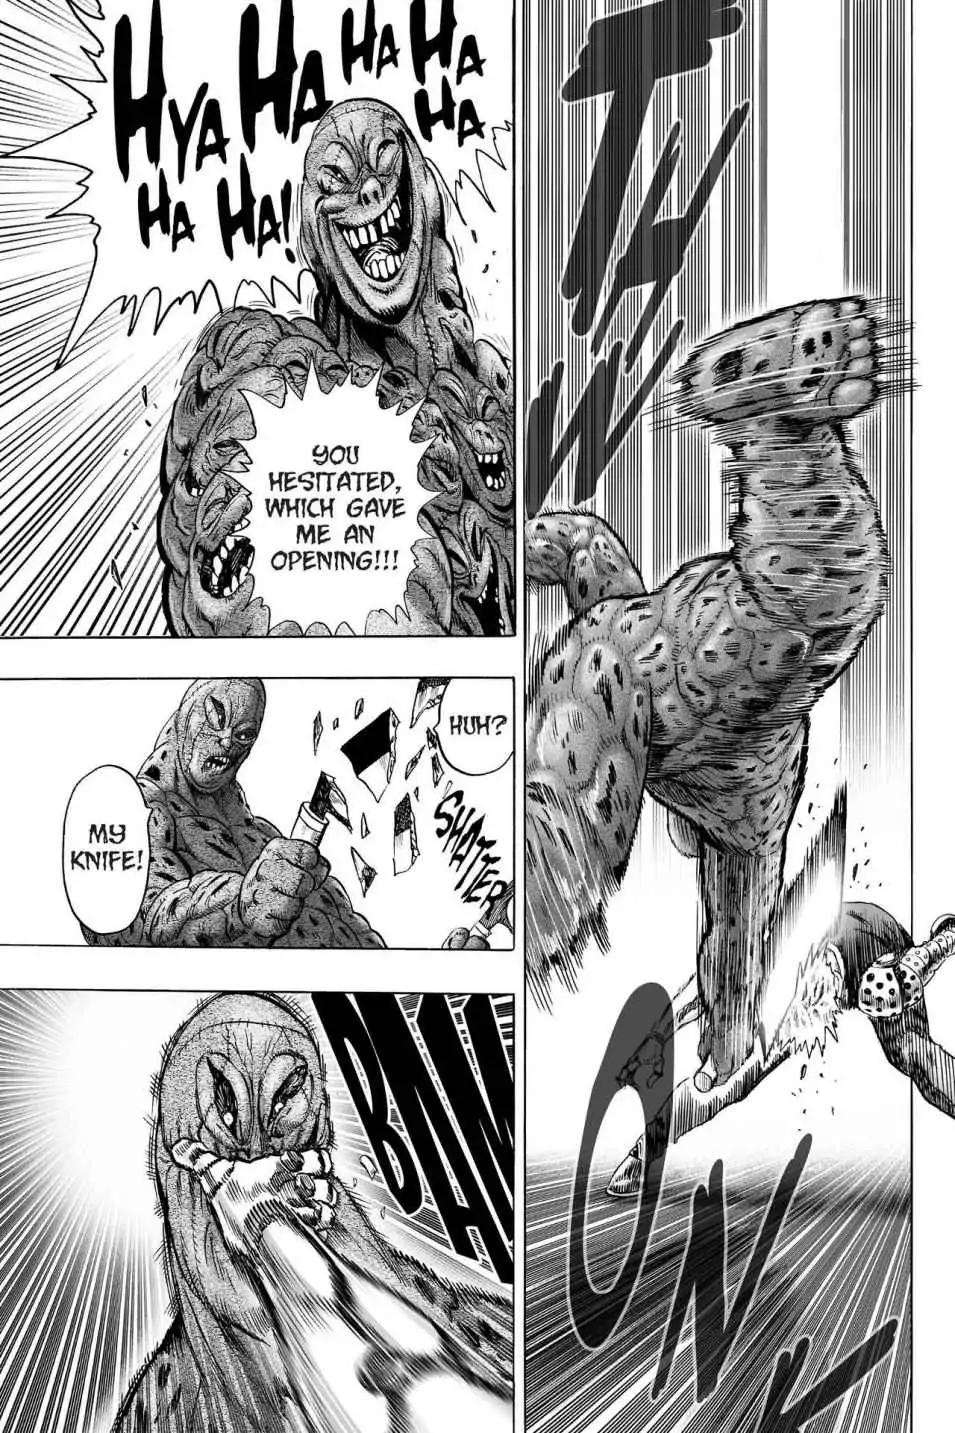 One-Punch Man chapter 63 page 29